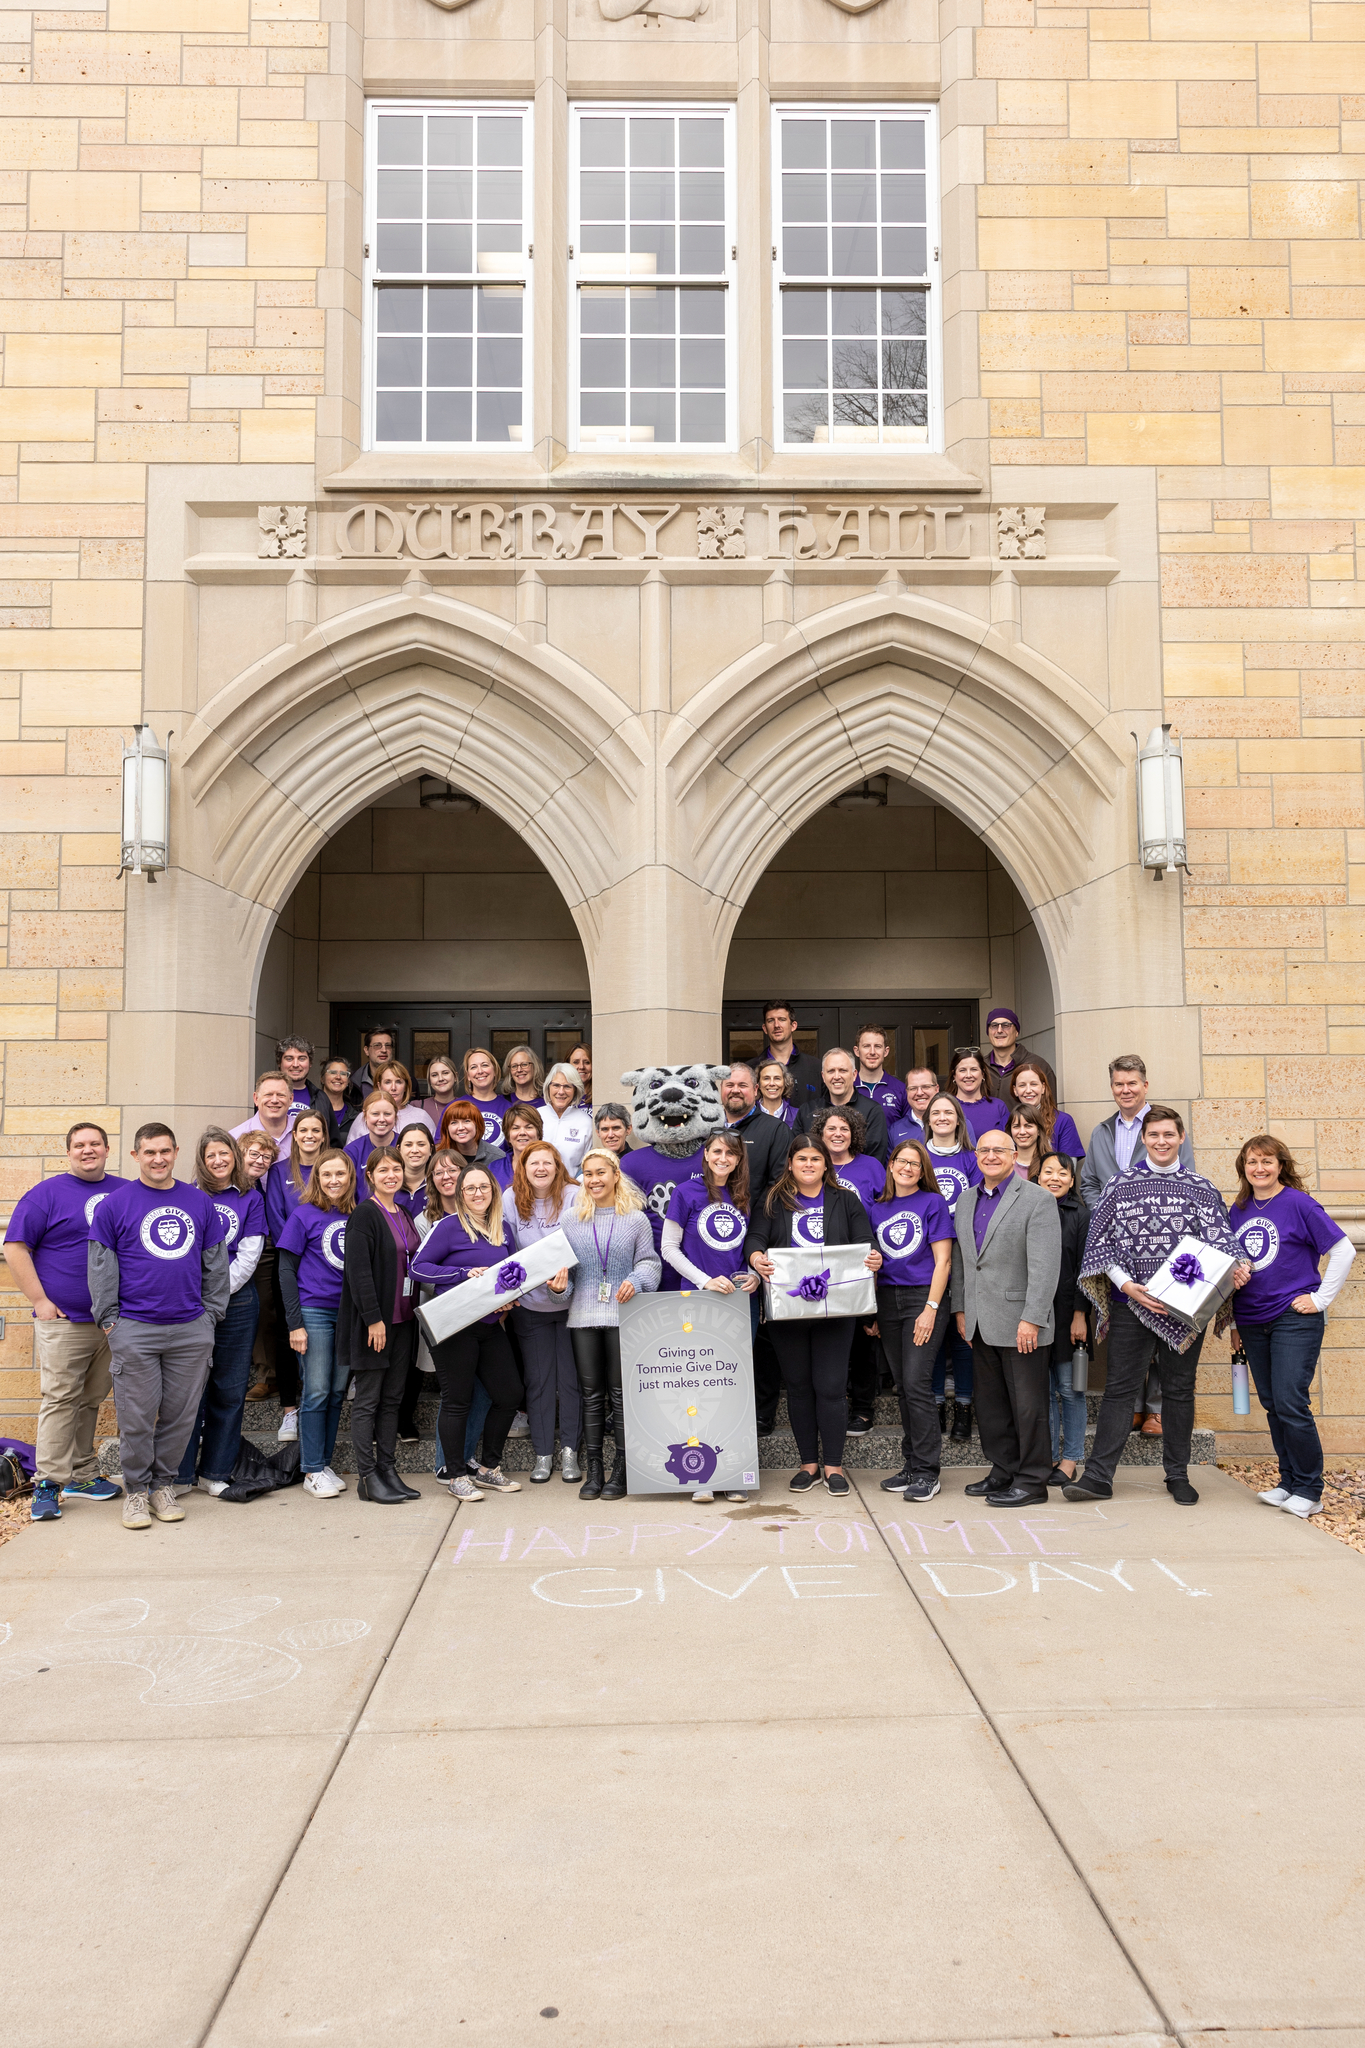 A group of staff members posing for a group picture on Tommie Give Day